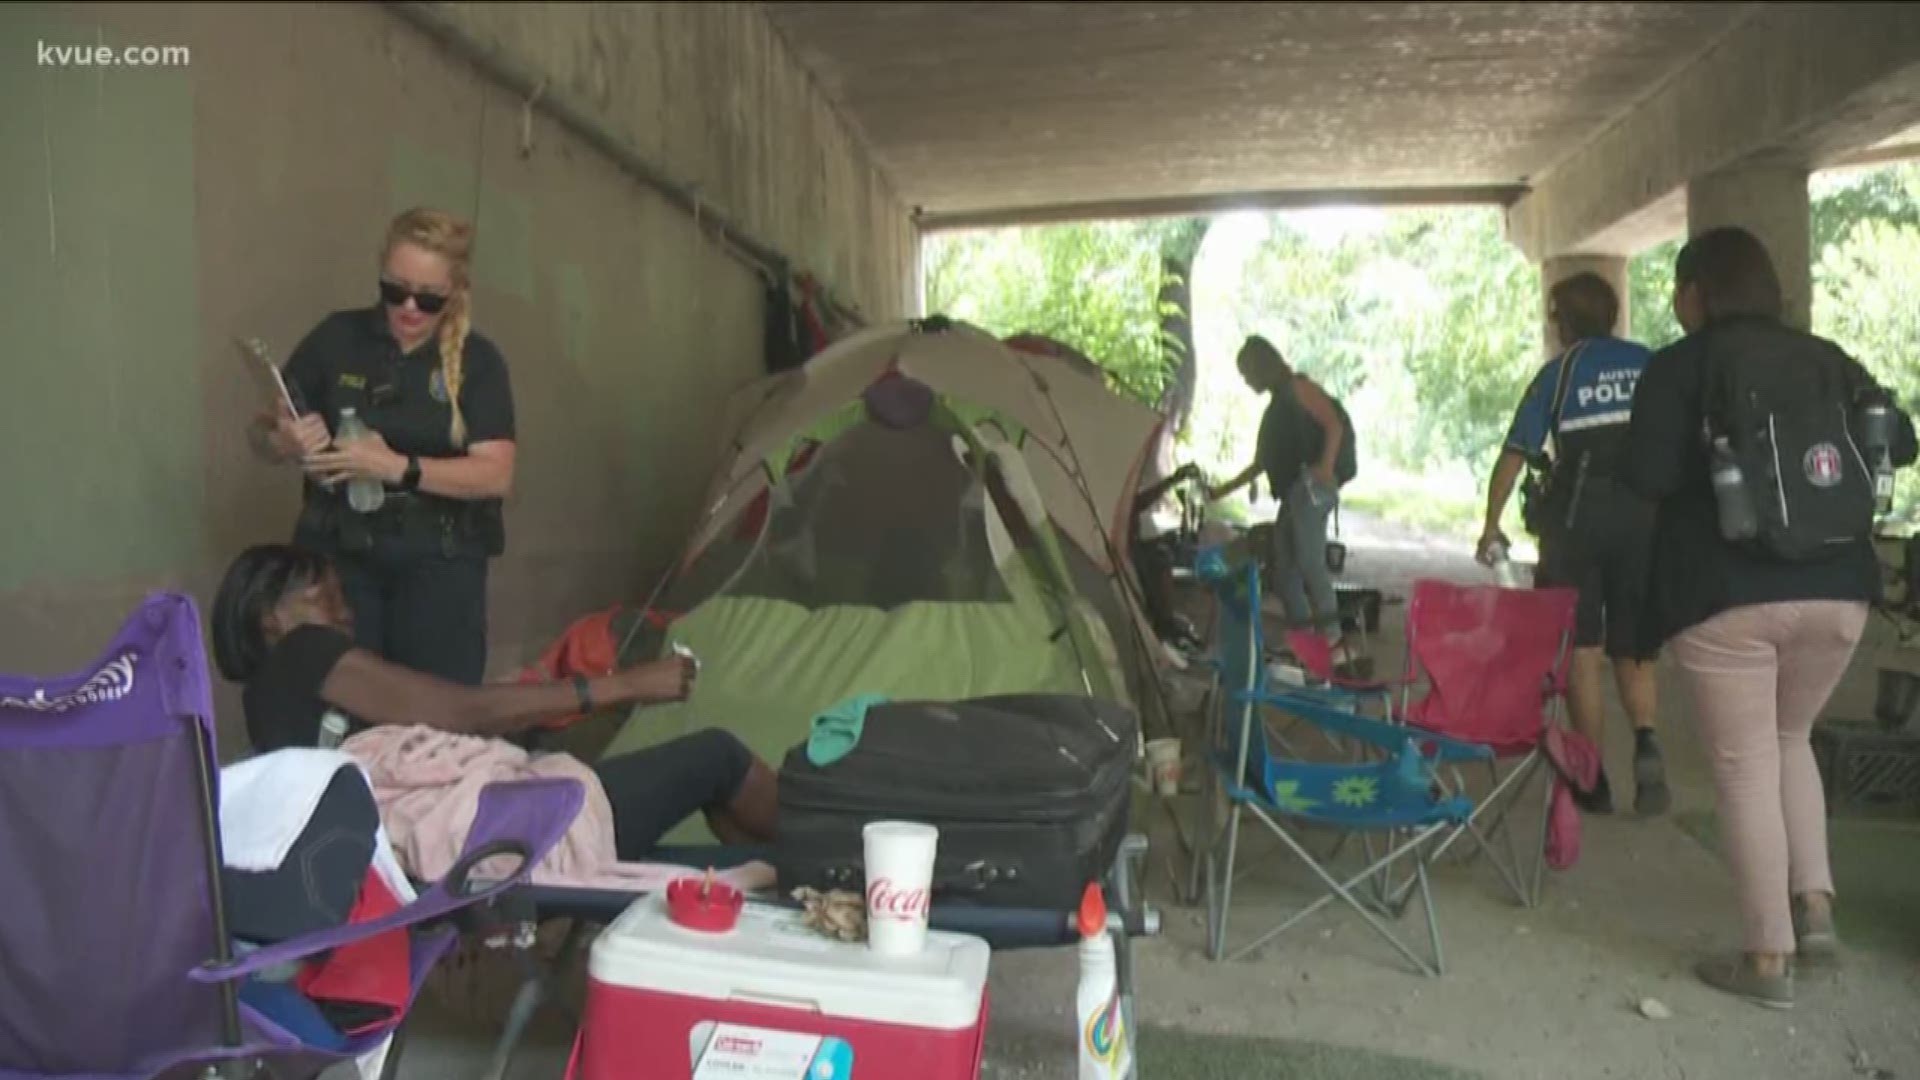 Some of the most frequently asked questions about tackling homelessness in Austin are how can we get people housing and what can we do to help? Molly Oak spoke to a team that's answering those
questions every day.